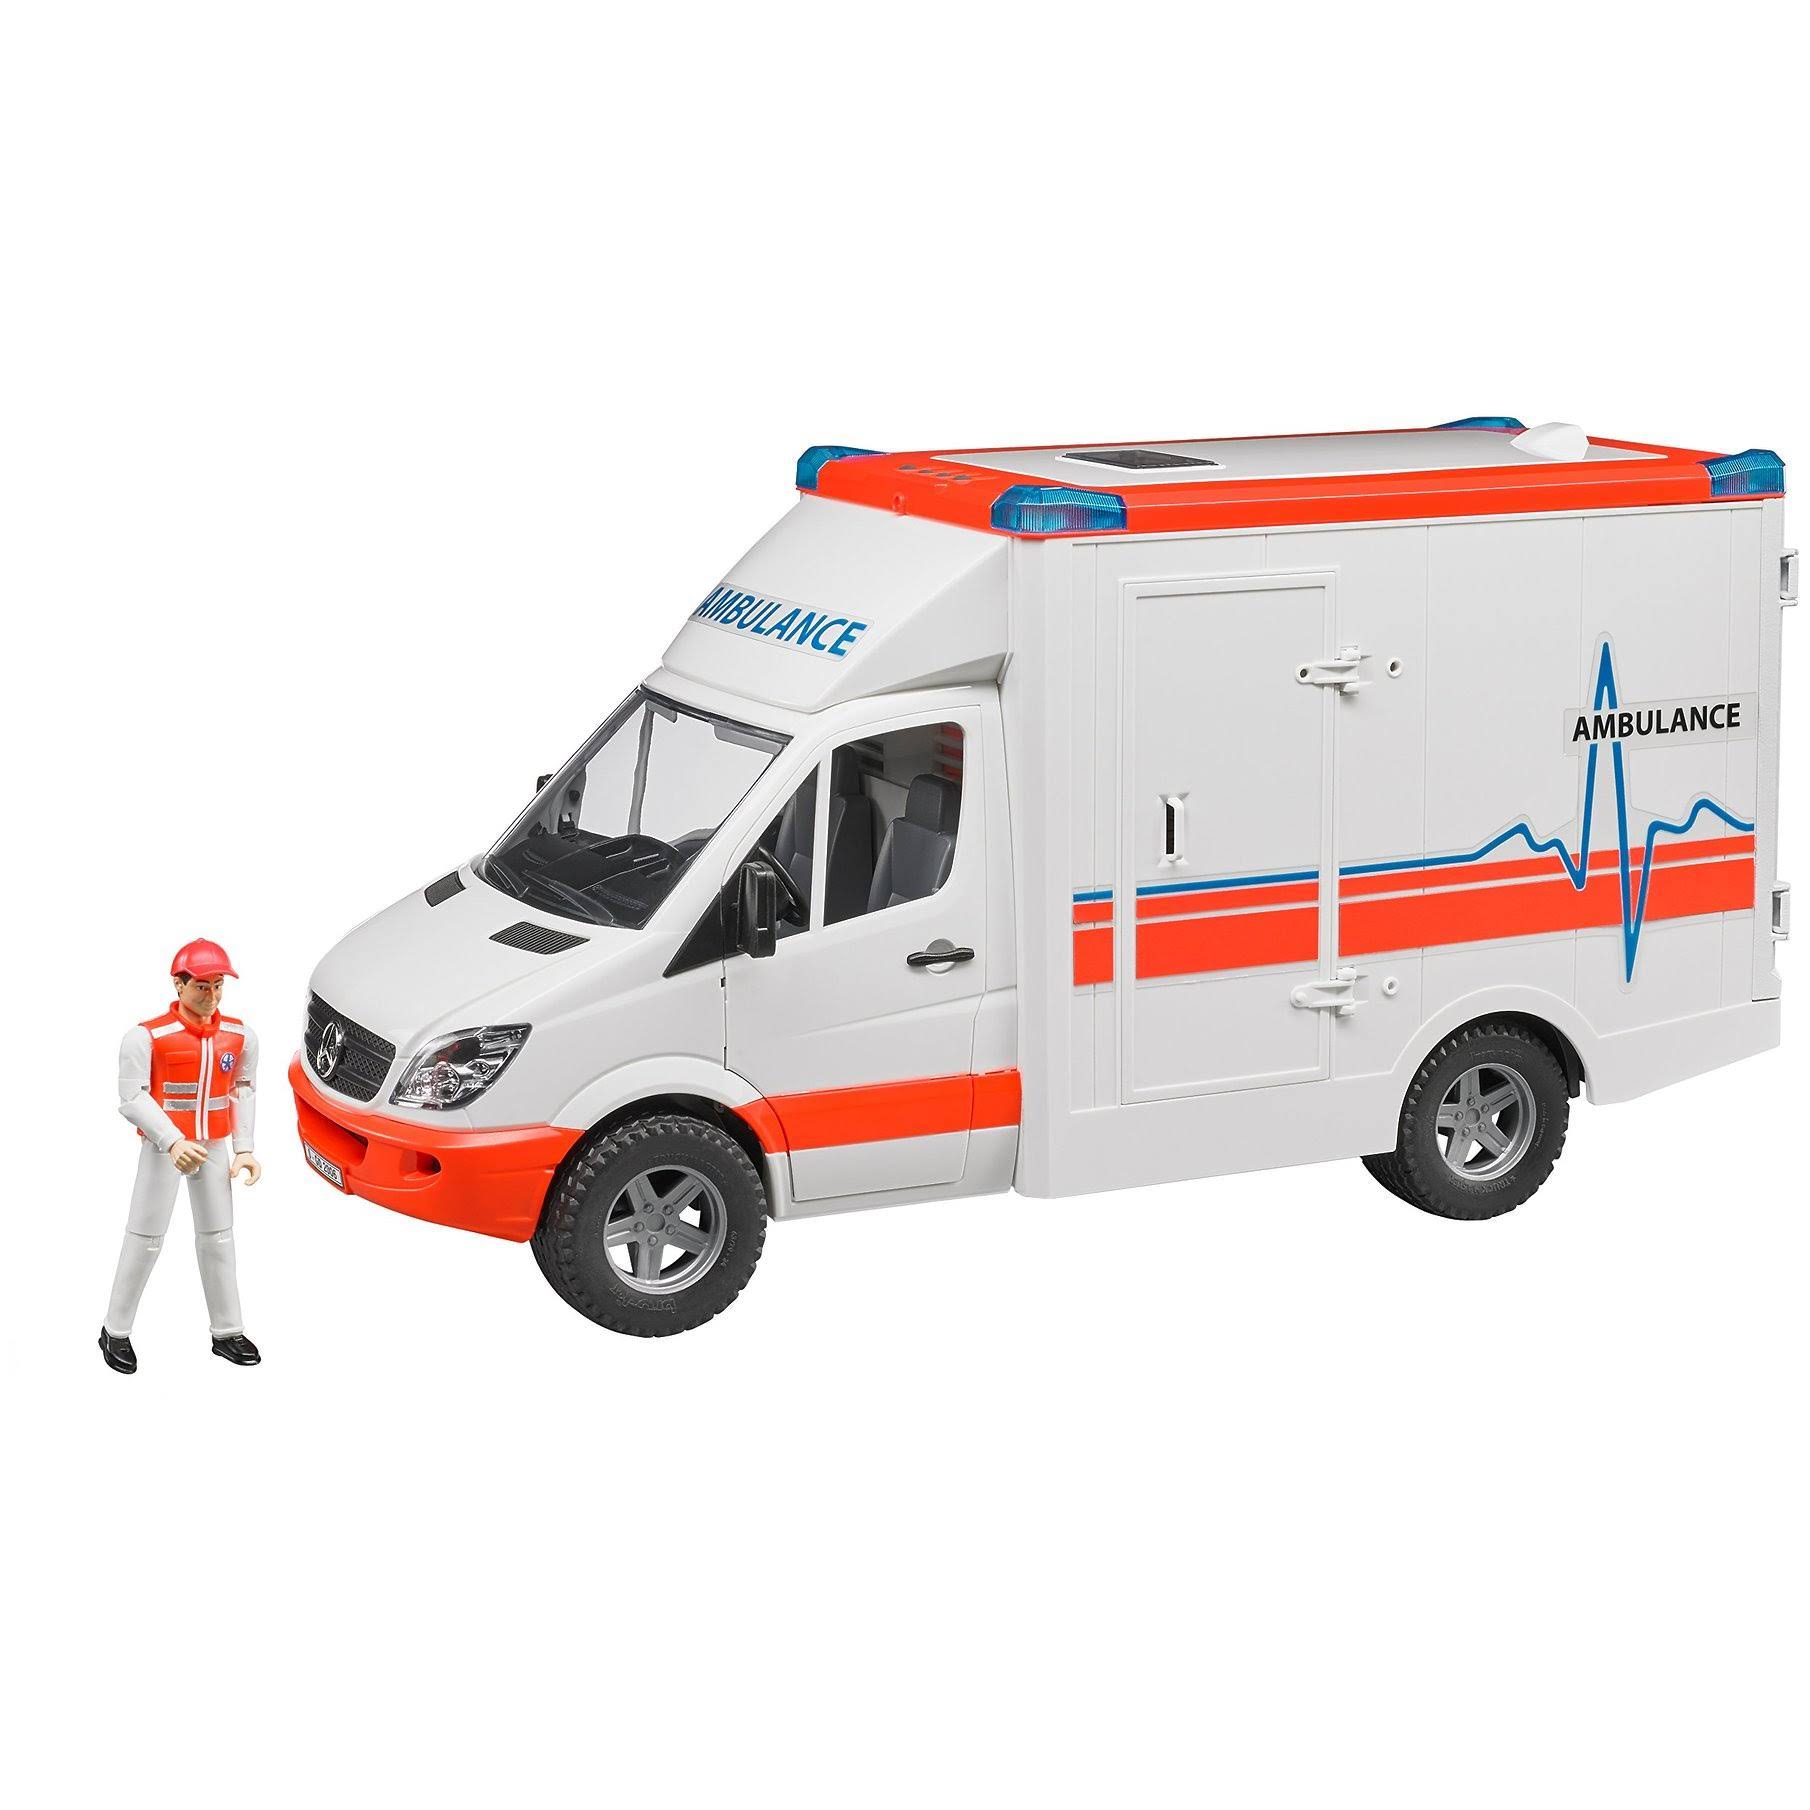 Mercedes Benz Sprinter Ambulance with Driver Model Toy Kit